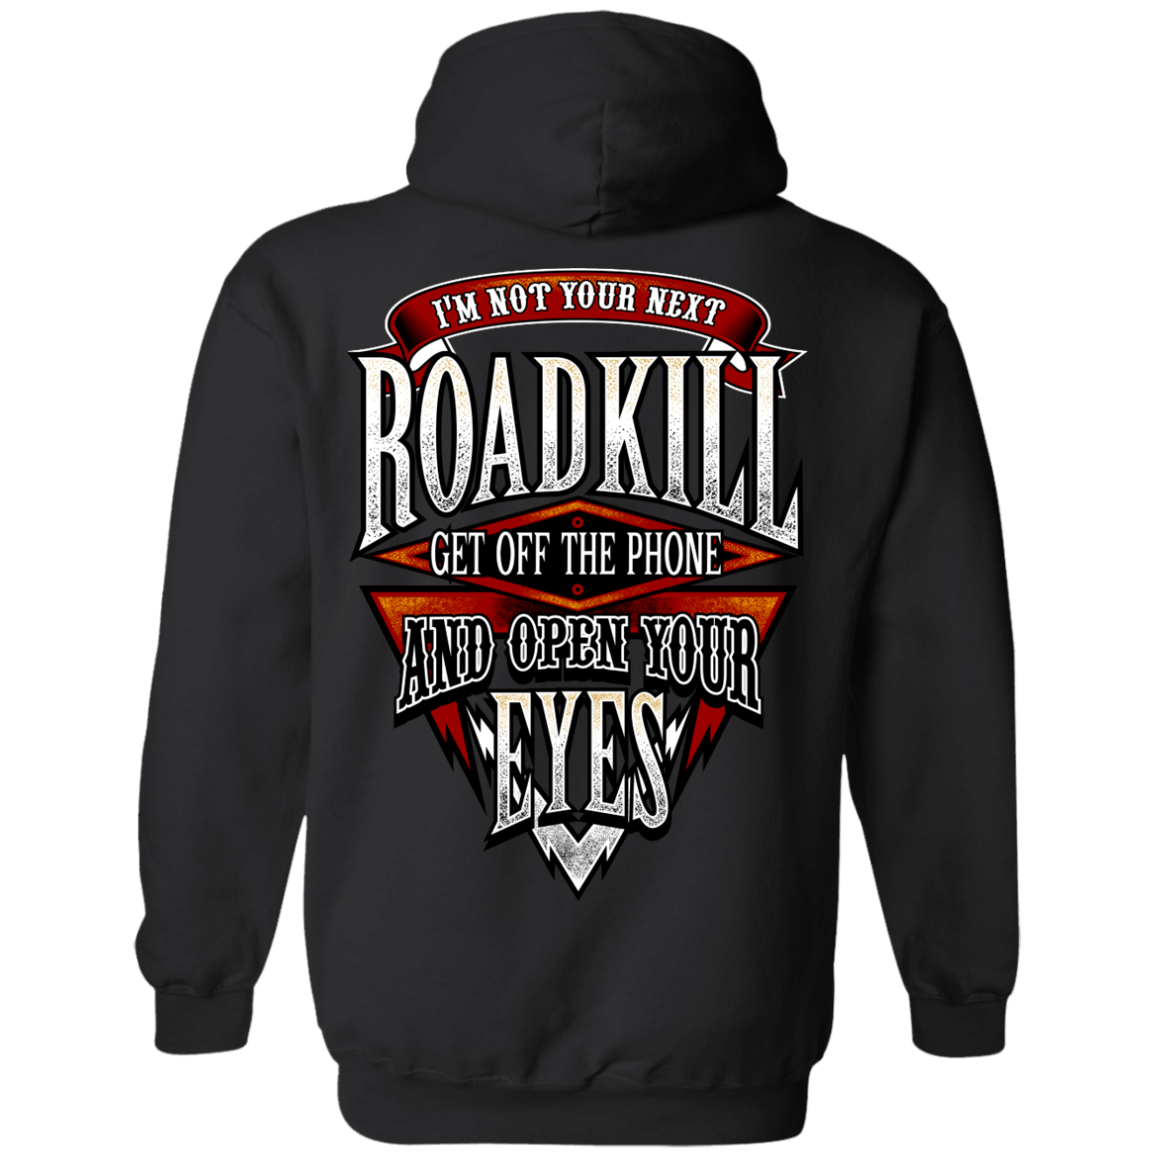 An attractive print black I'm Not Your Next Roadkill Get Off The Phone And Open Your Eyes T-Shirt & Hoodie made of high-quality cotton, featuring the phrase "not your best roadkill.